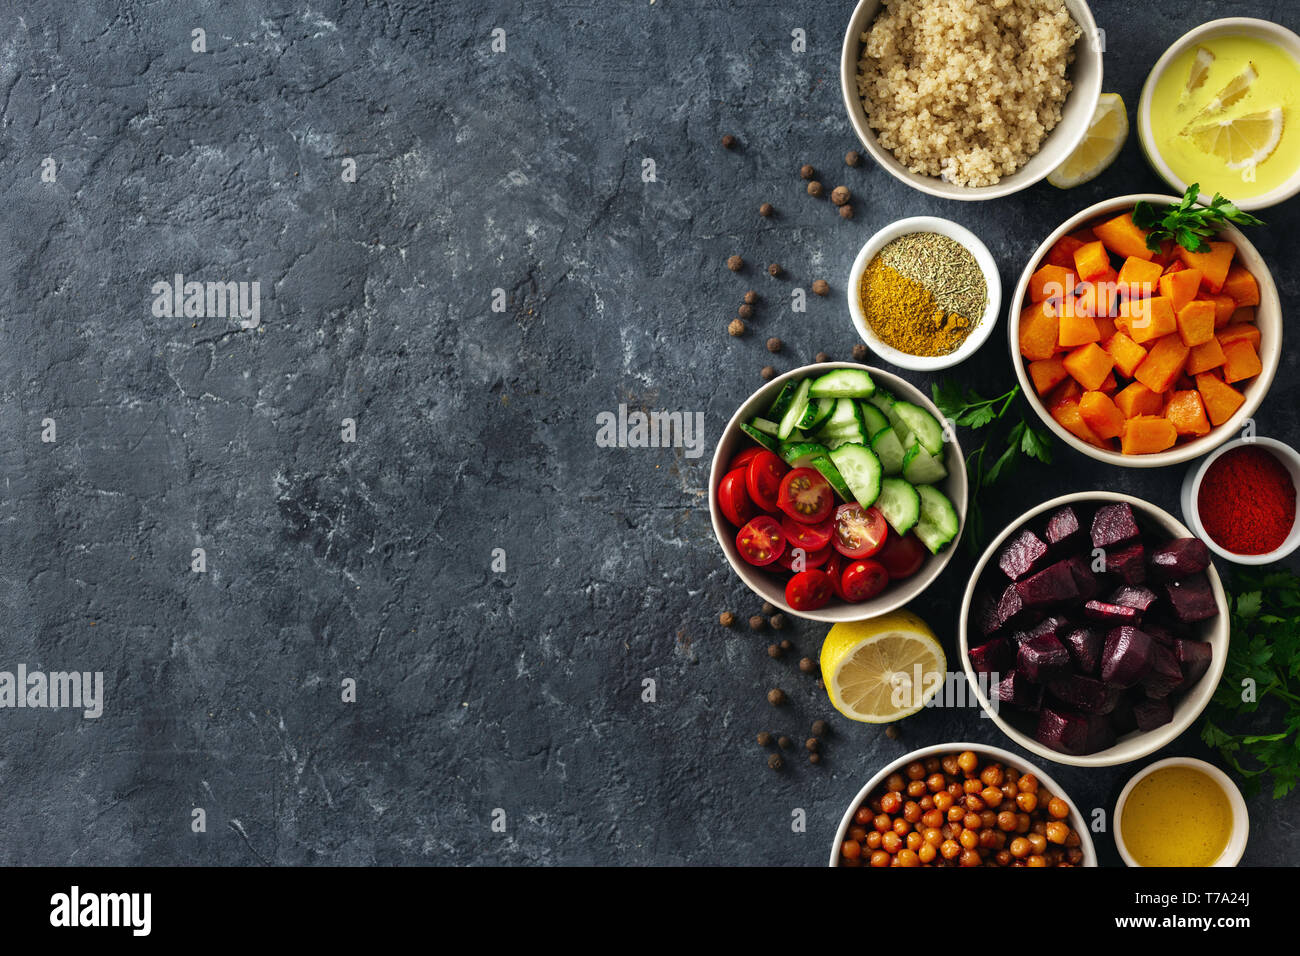 Set of healthy vegetarian ingredients for cooking. Spiced chickpeas, Baked pumpkin and beets, quinoa and vegetables on dark stone background with copy Stock Photo